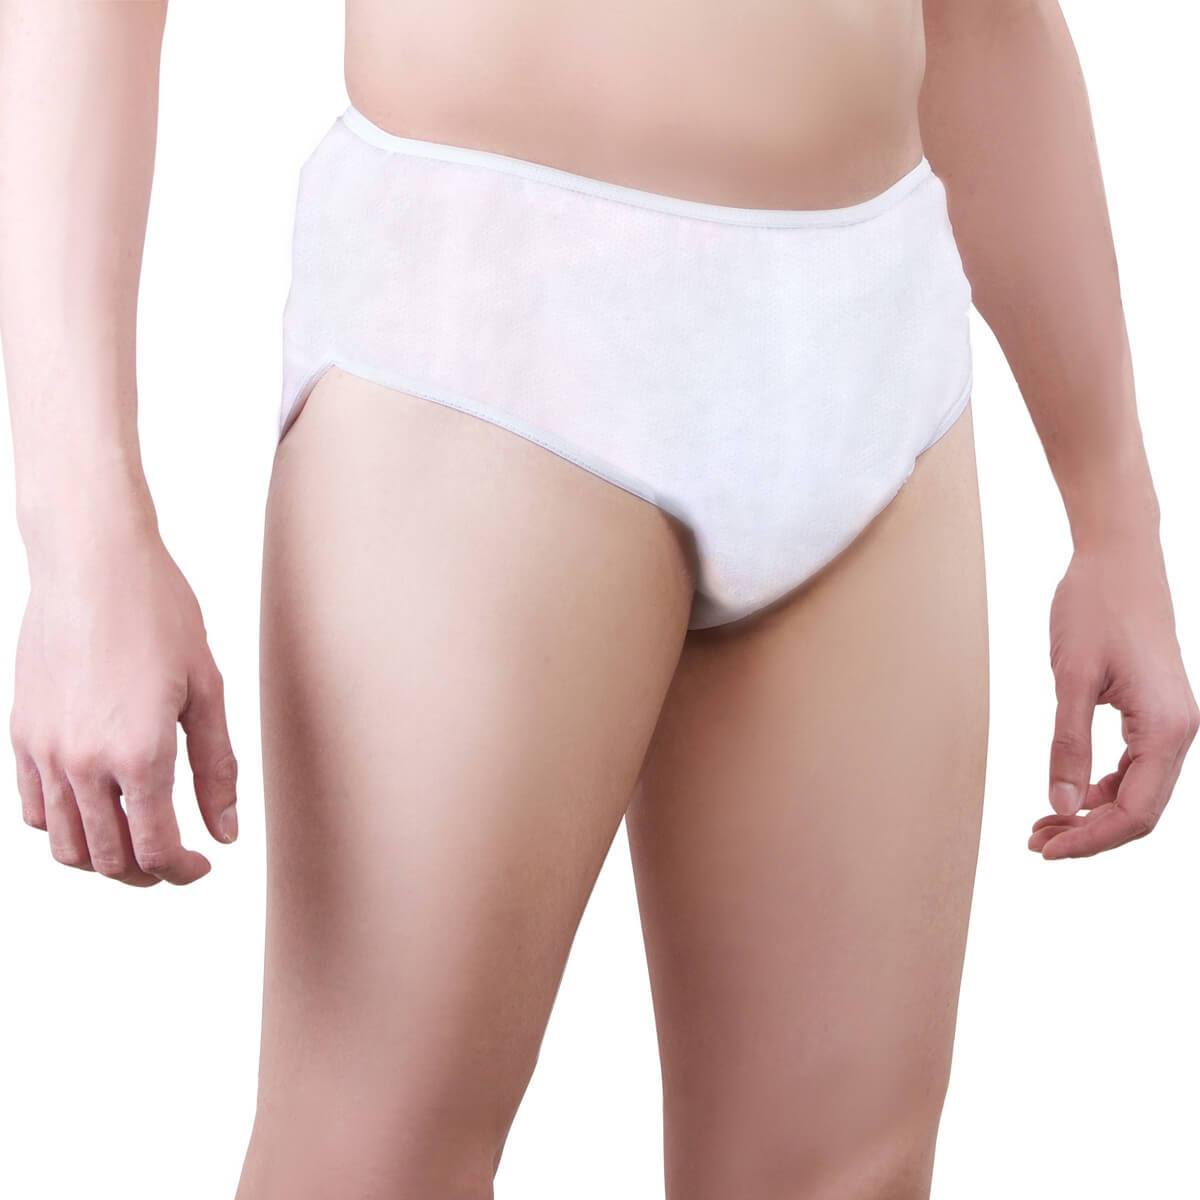 http://owtravelproducts.com/cdn/shop/products/One-Wear_Disposable_Briefs_Pants_Underpants_for_Hospital_Travel_Spa_and_Emergency_-_PolyPro_White_-_Super_Soft_Disposable_PolyPro_Underwear.jpg?v=1652458726